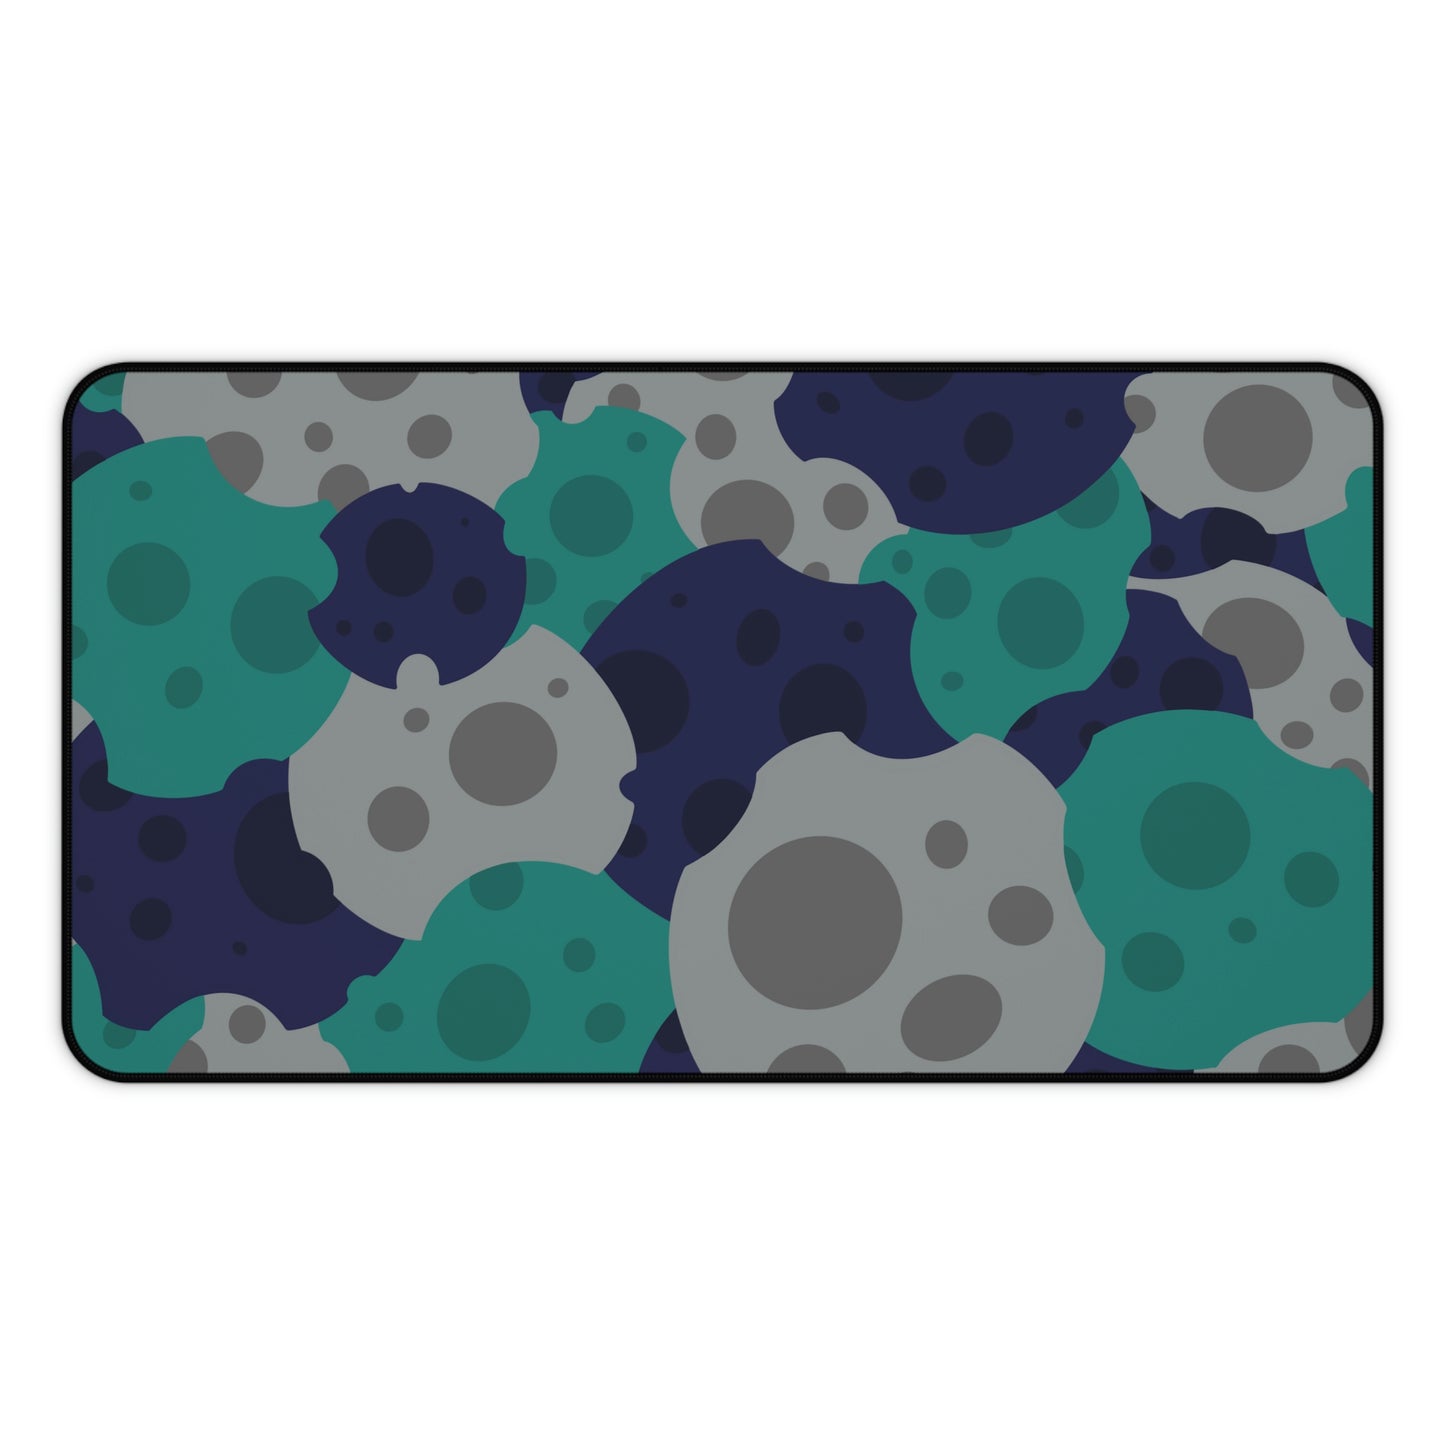 A 12" x 22" desk mat with gray, teal, and dark blue meteorites.